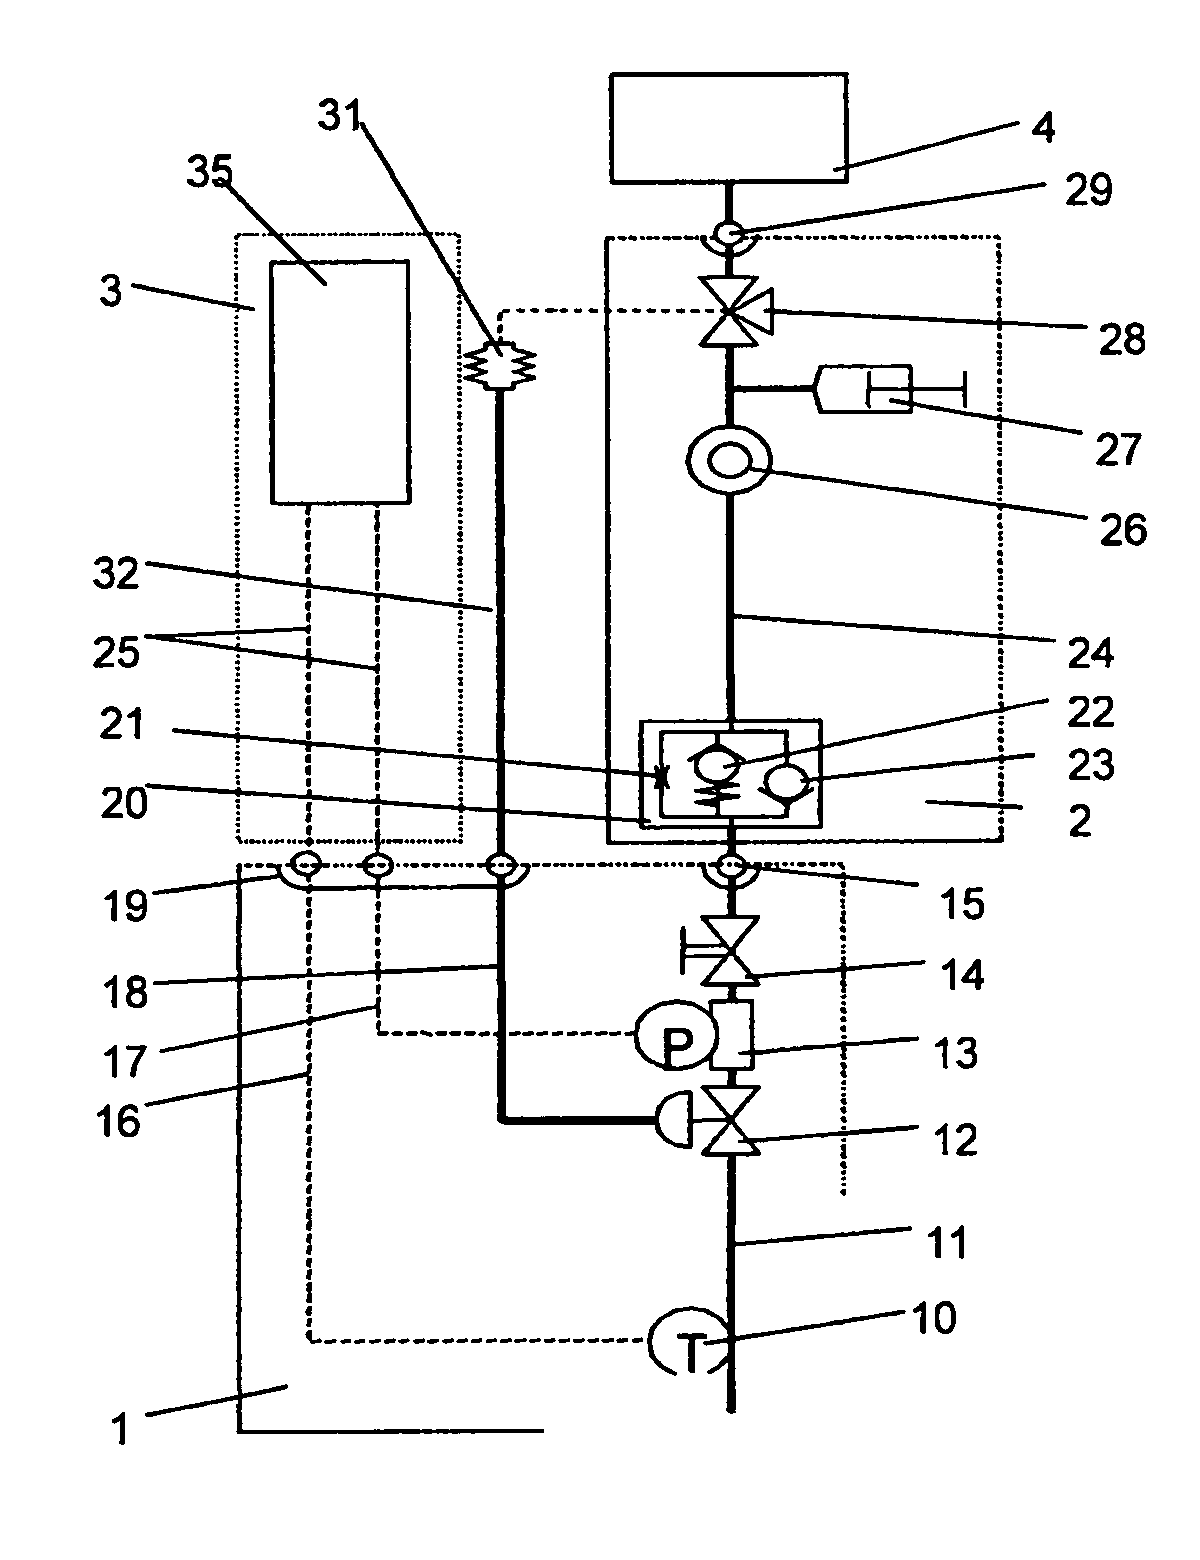 Blood vessel catheter and injection system for carrying out a blood pressure measurement of a patient